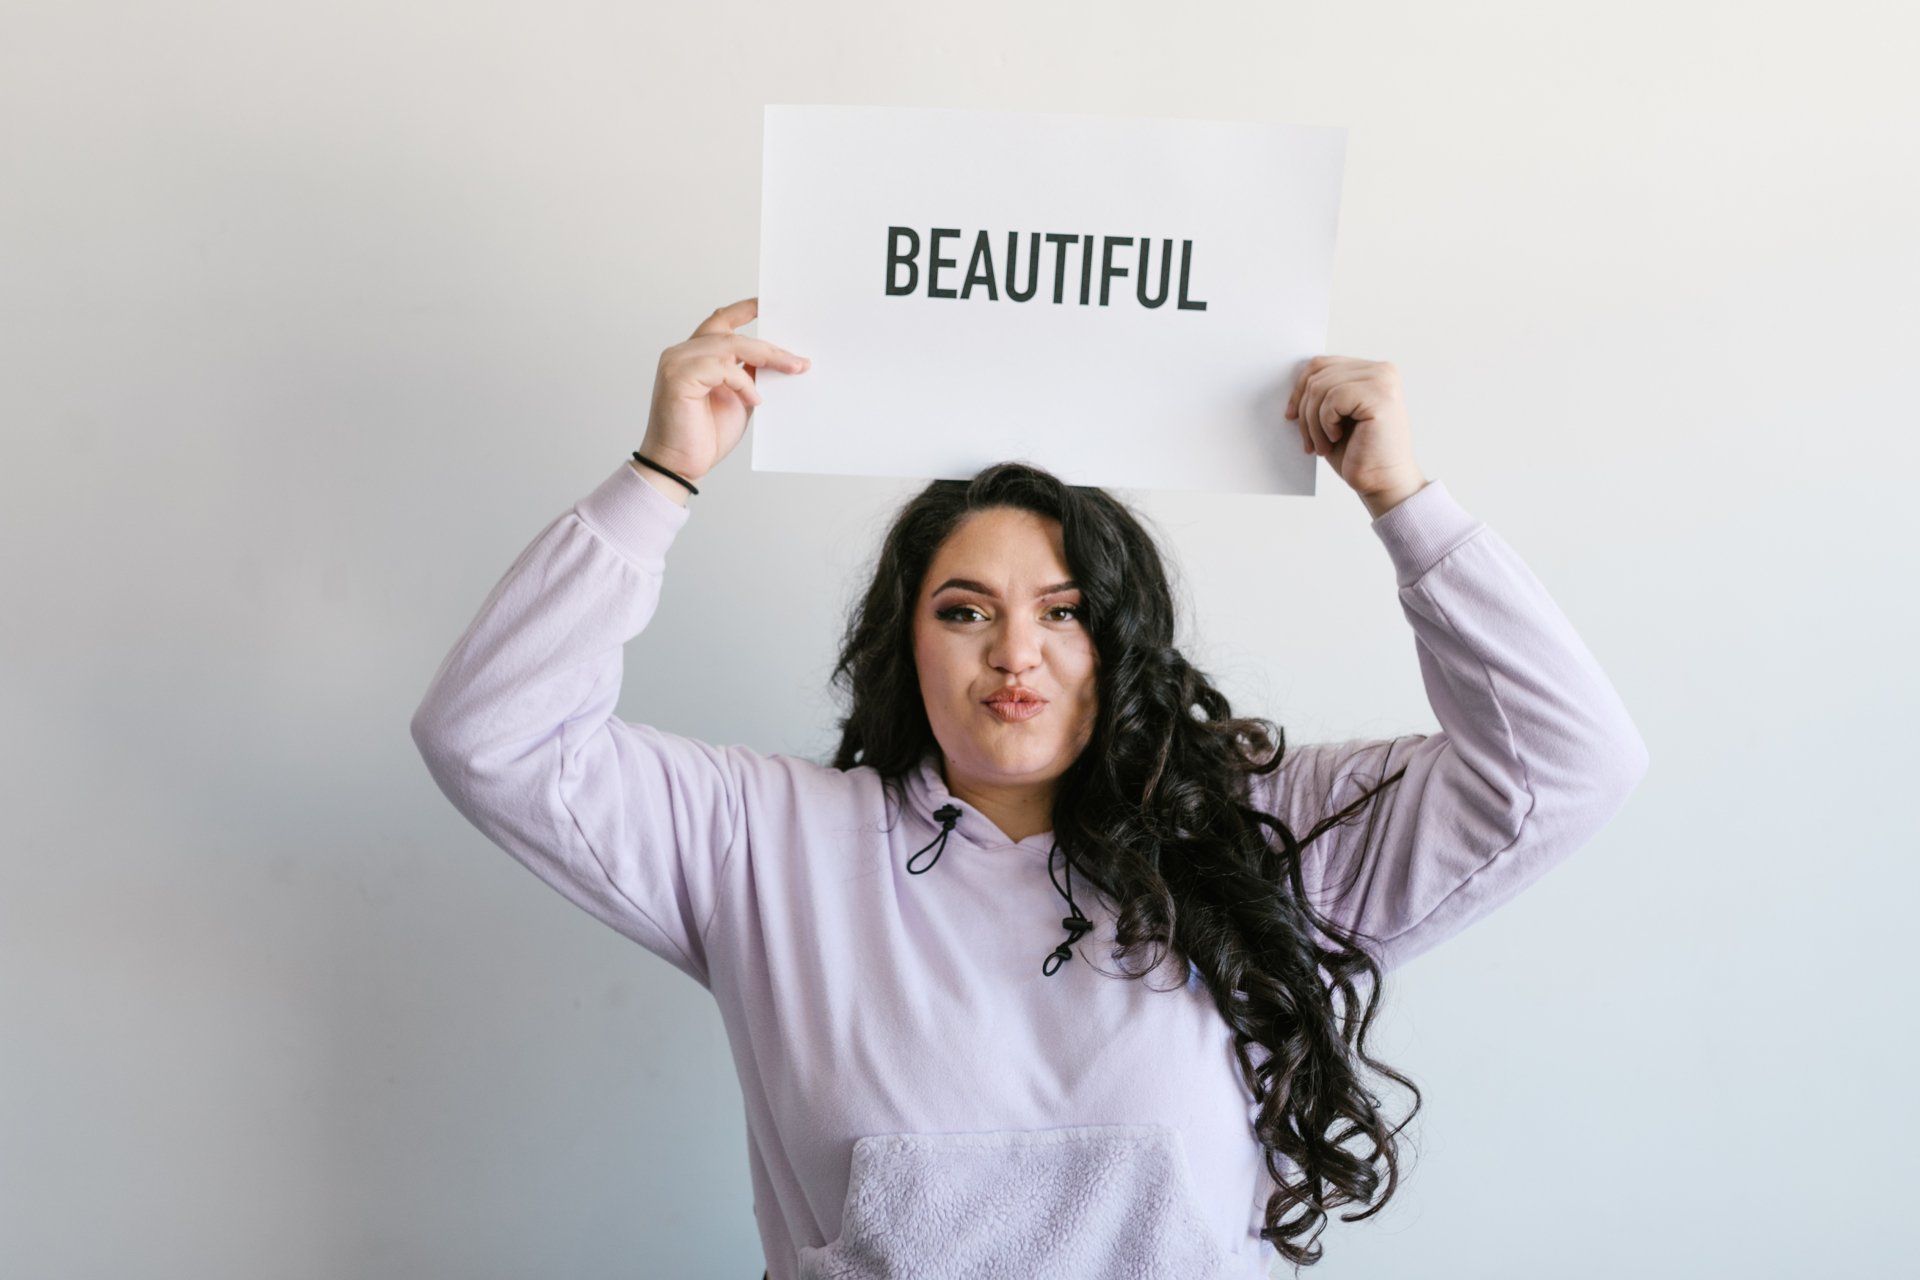 A woman is holding a sign that says beautiful over her head.